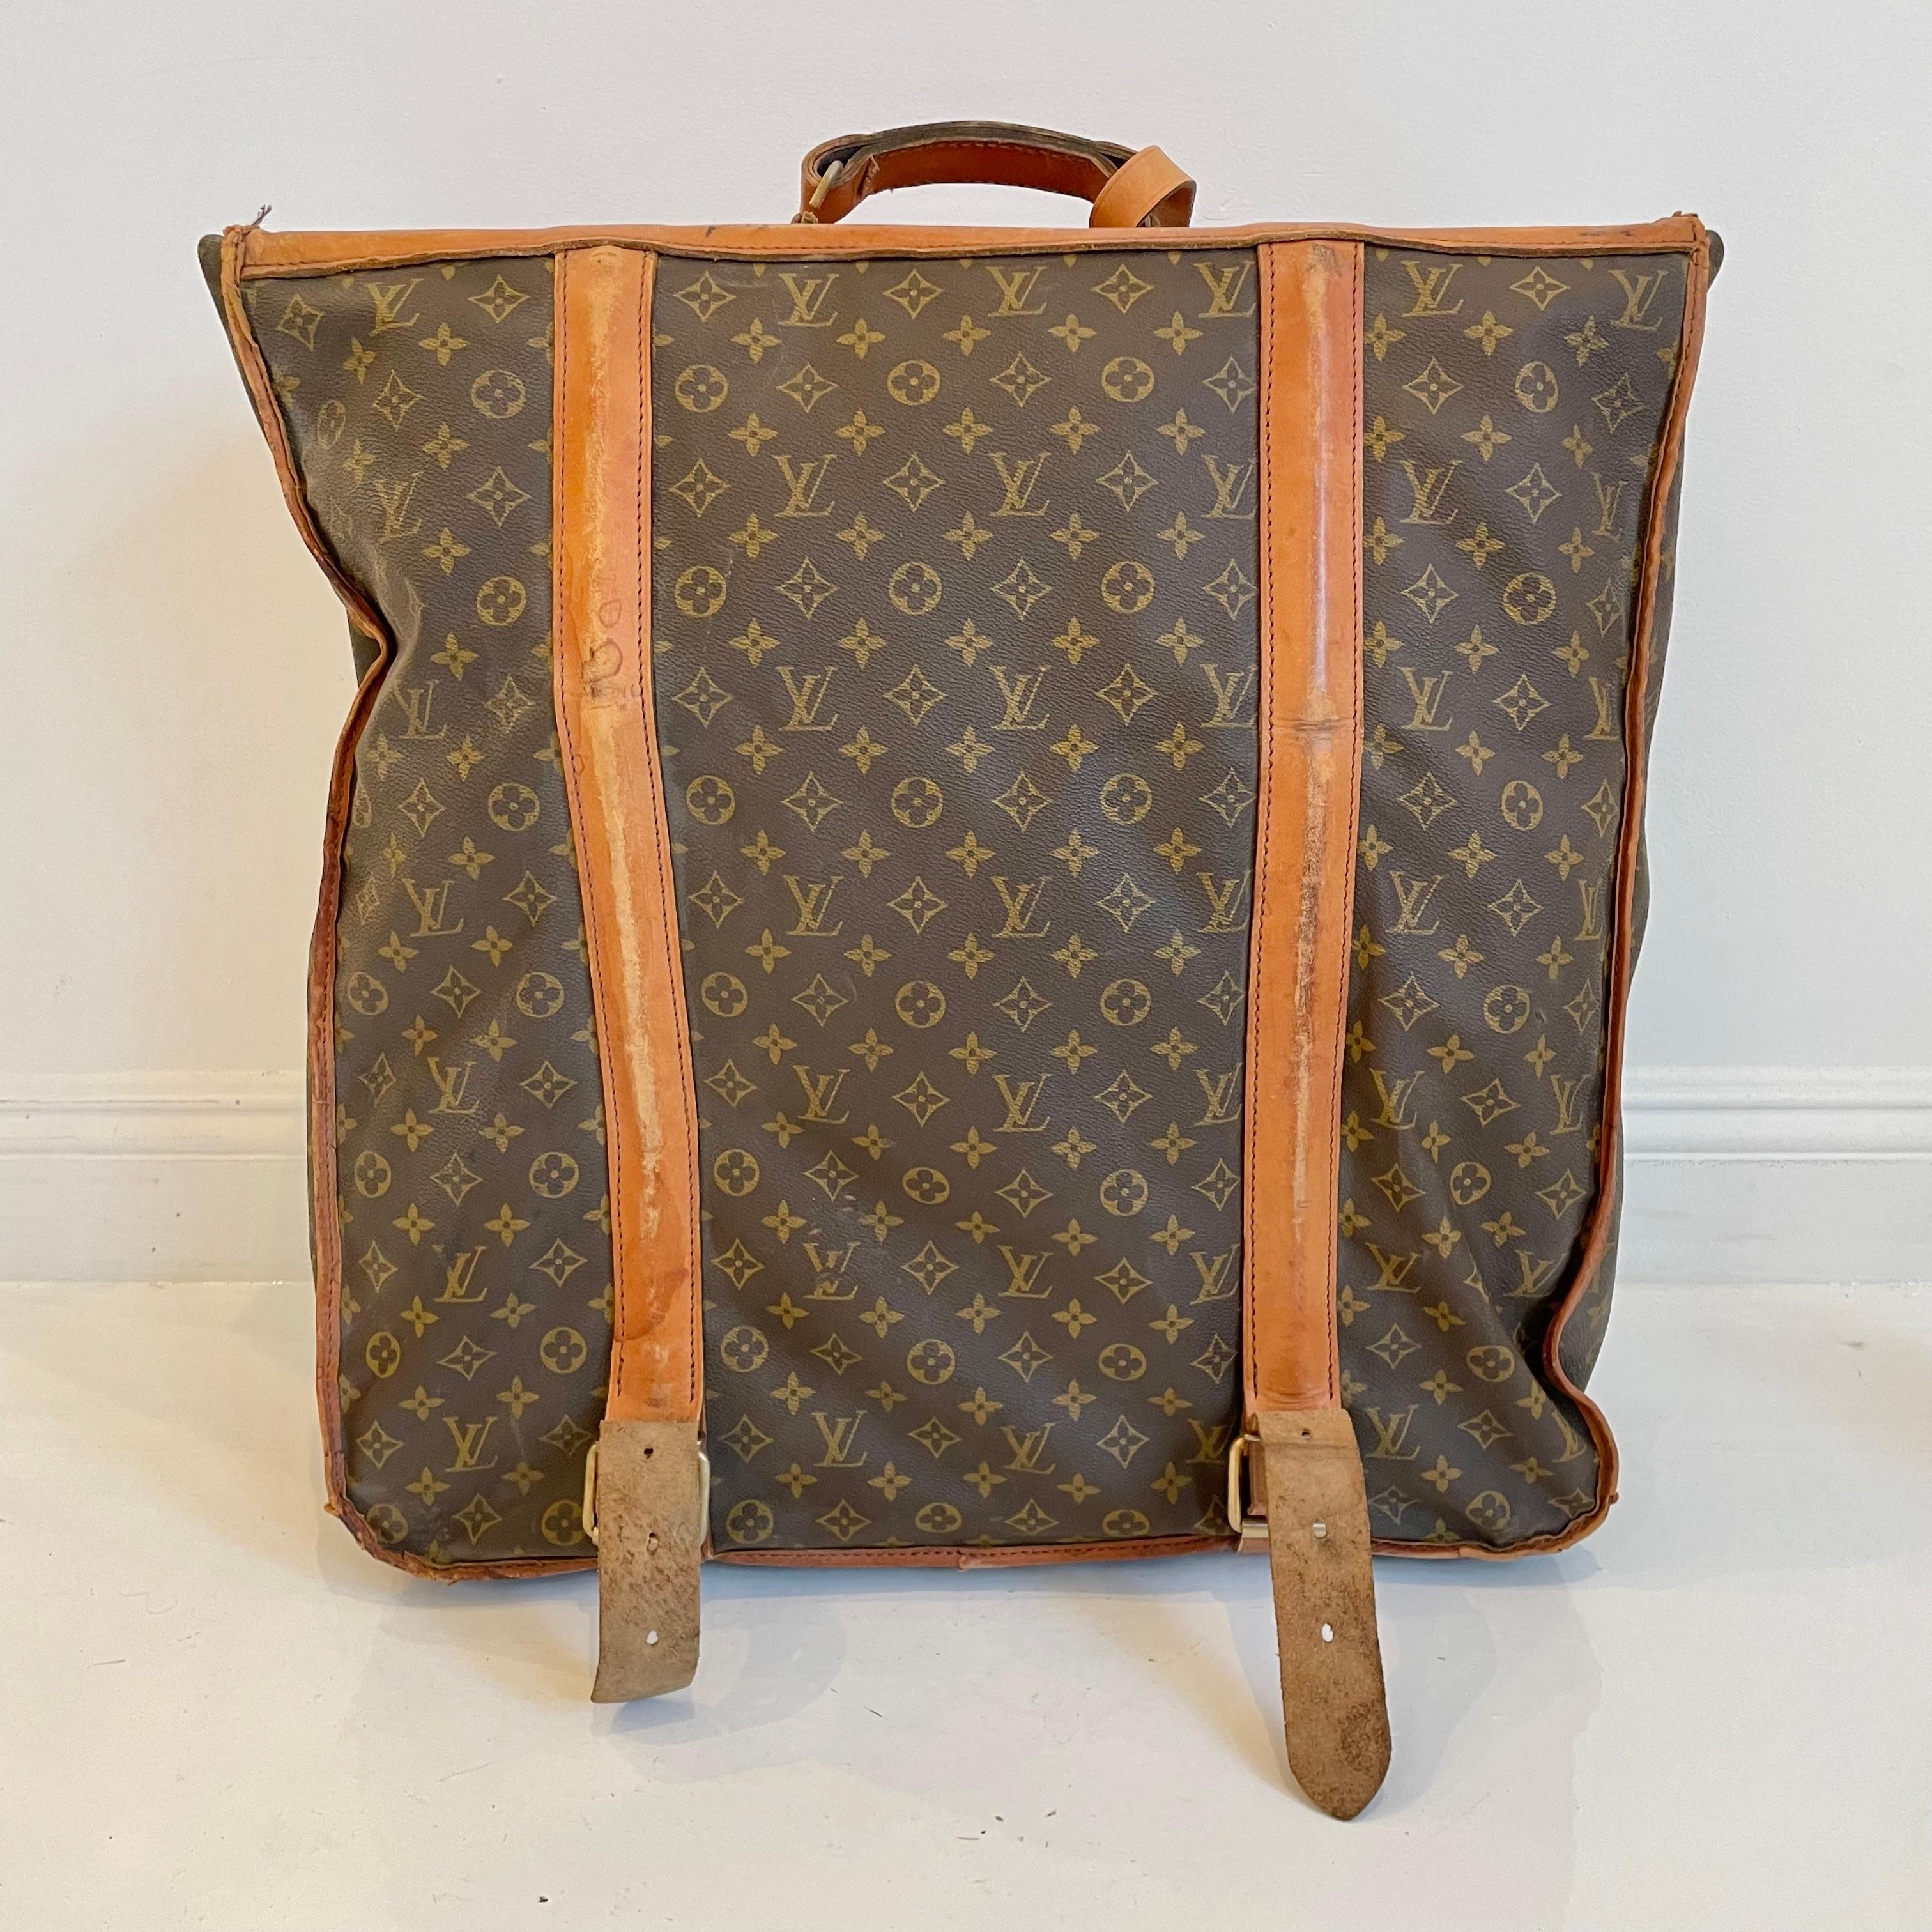 Classic vintage Louis Vuitton garment bag. Oversized bag can fit 7-10 dresses, jackets or suits. Conveniently folds open and closes, secured with leather straps. Perfect for short trips. Timeless LV monogram print with saddle leather and brass